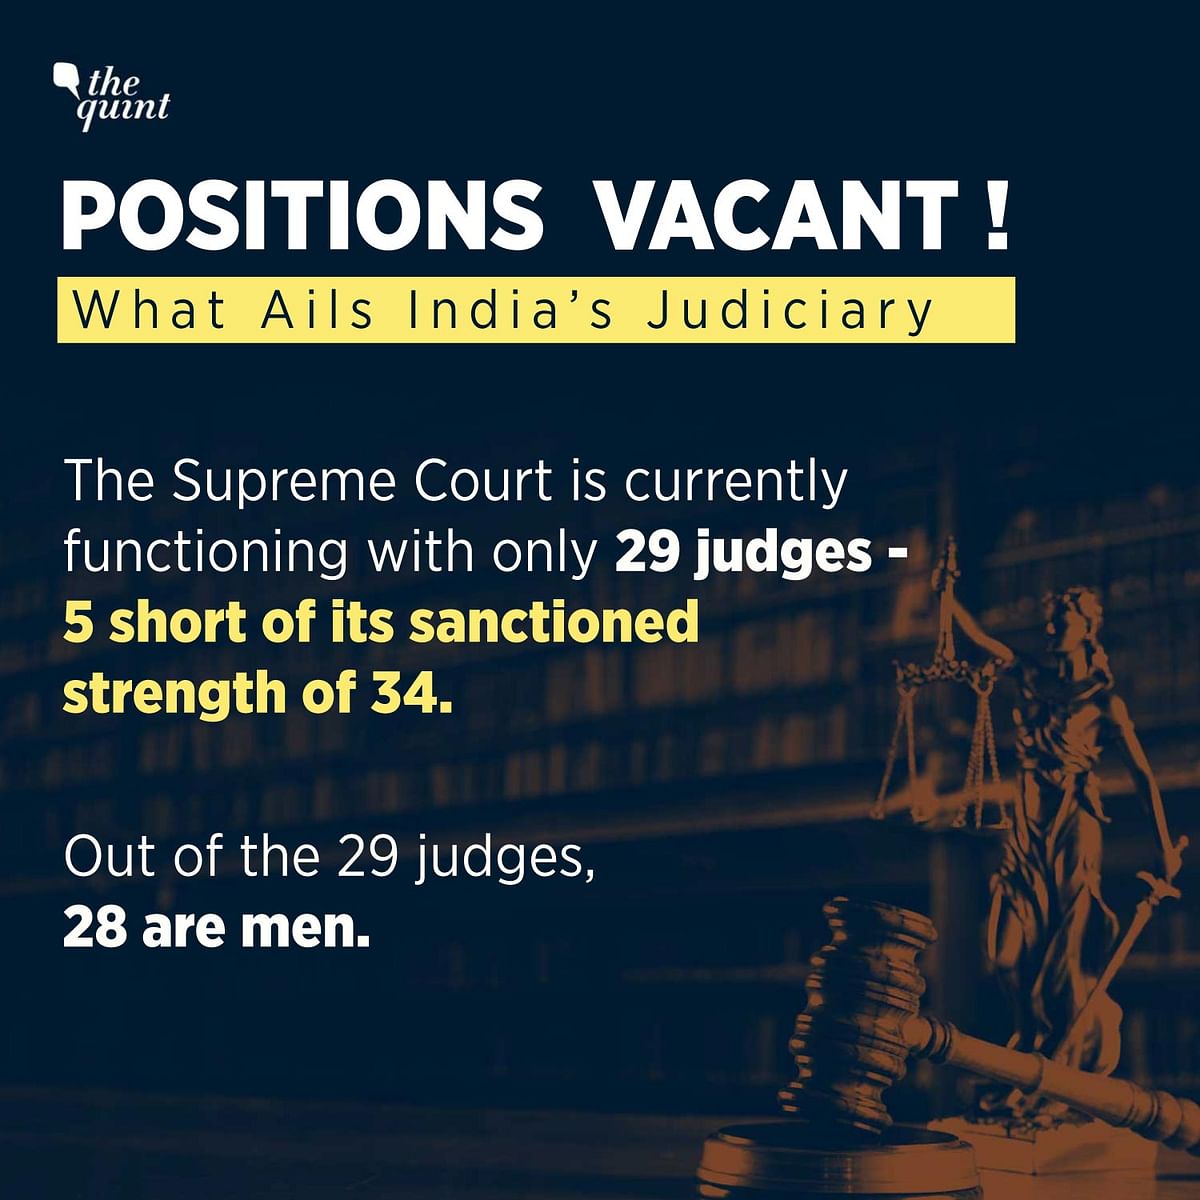 Judicial vacancies have increased consistently over past few years, with the representation of women being abysmal.